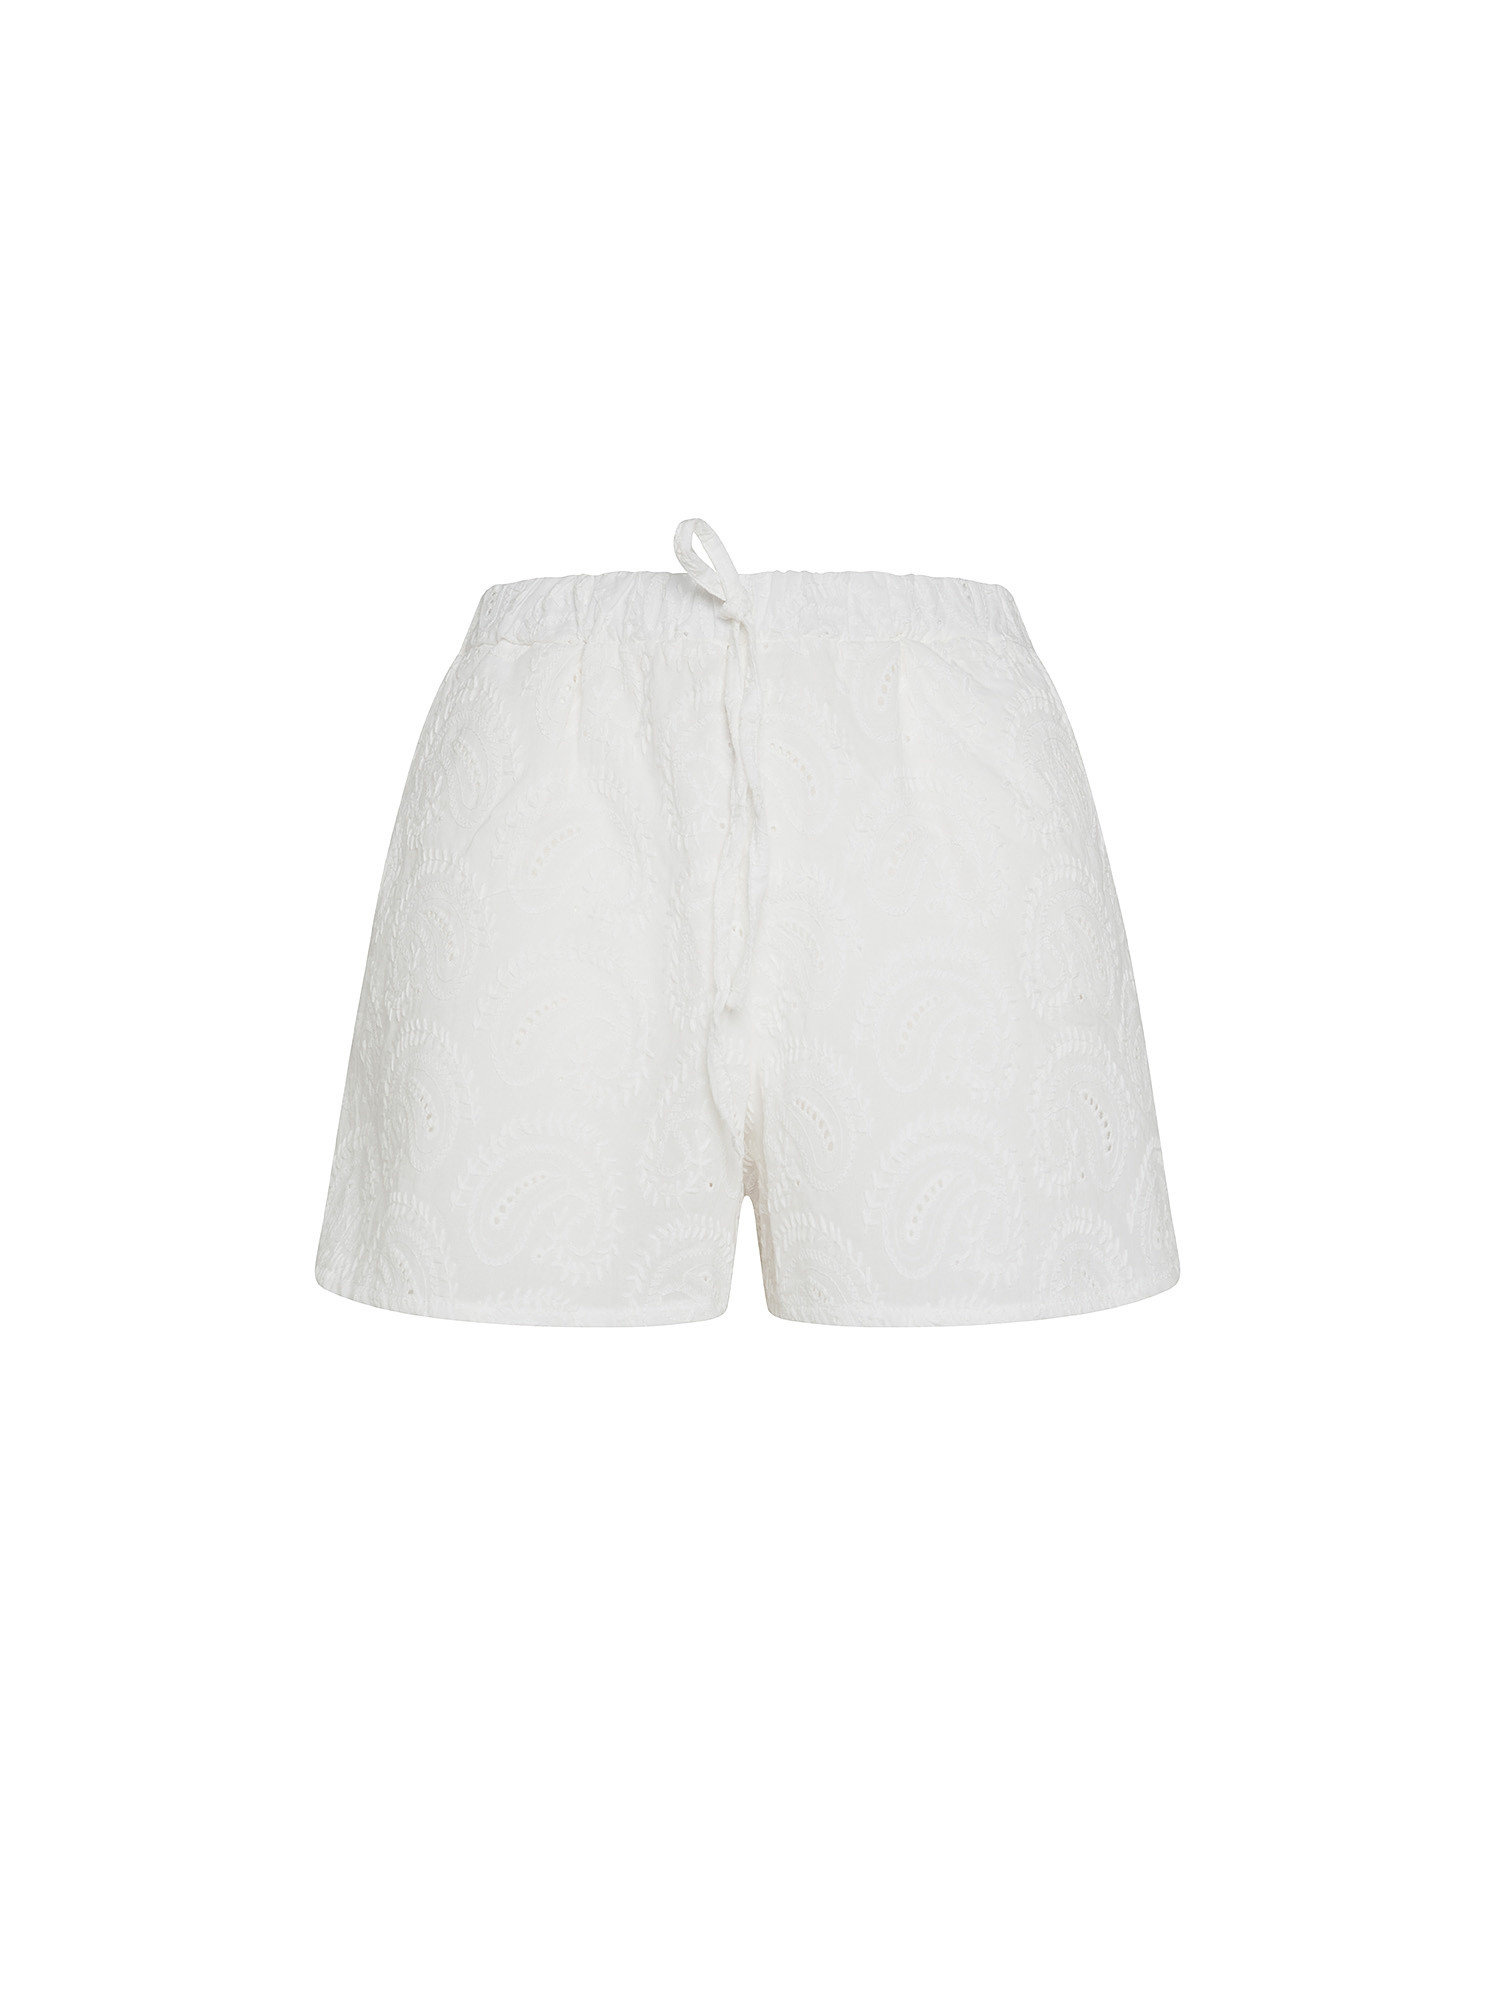 Solid color sangallo shorts in cotton, White, large image number 0